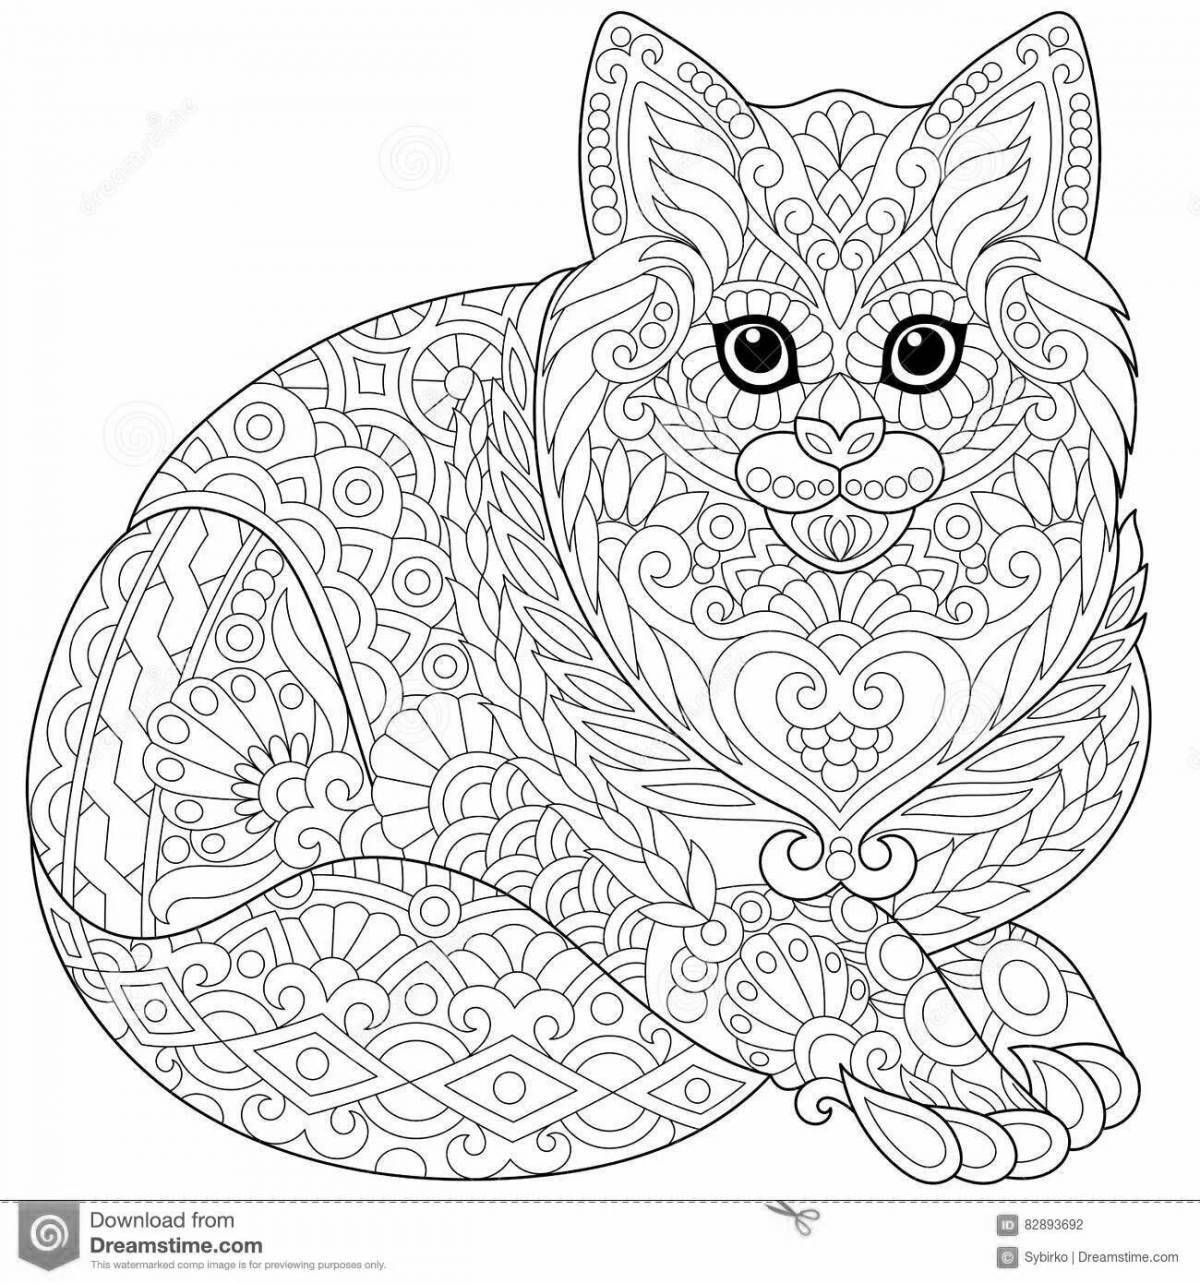 Radiant coloring page animals complex cute